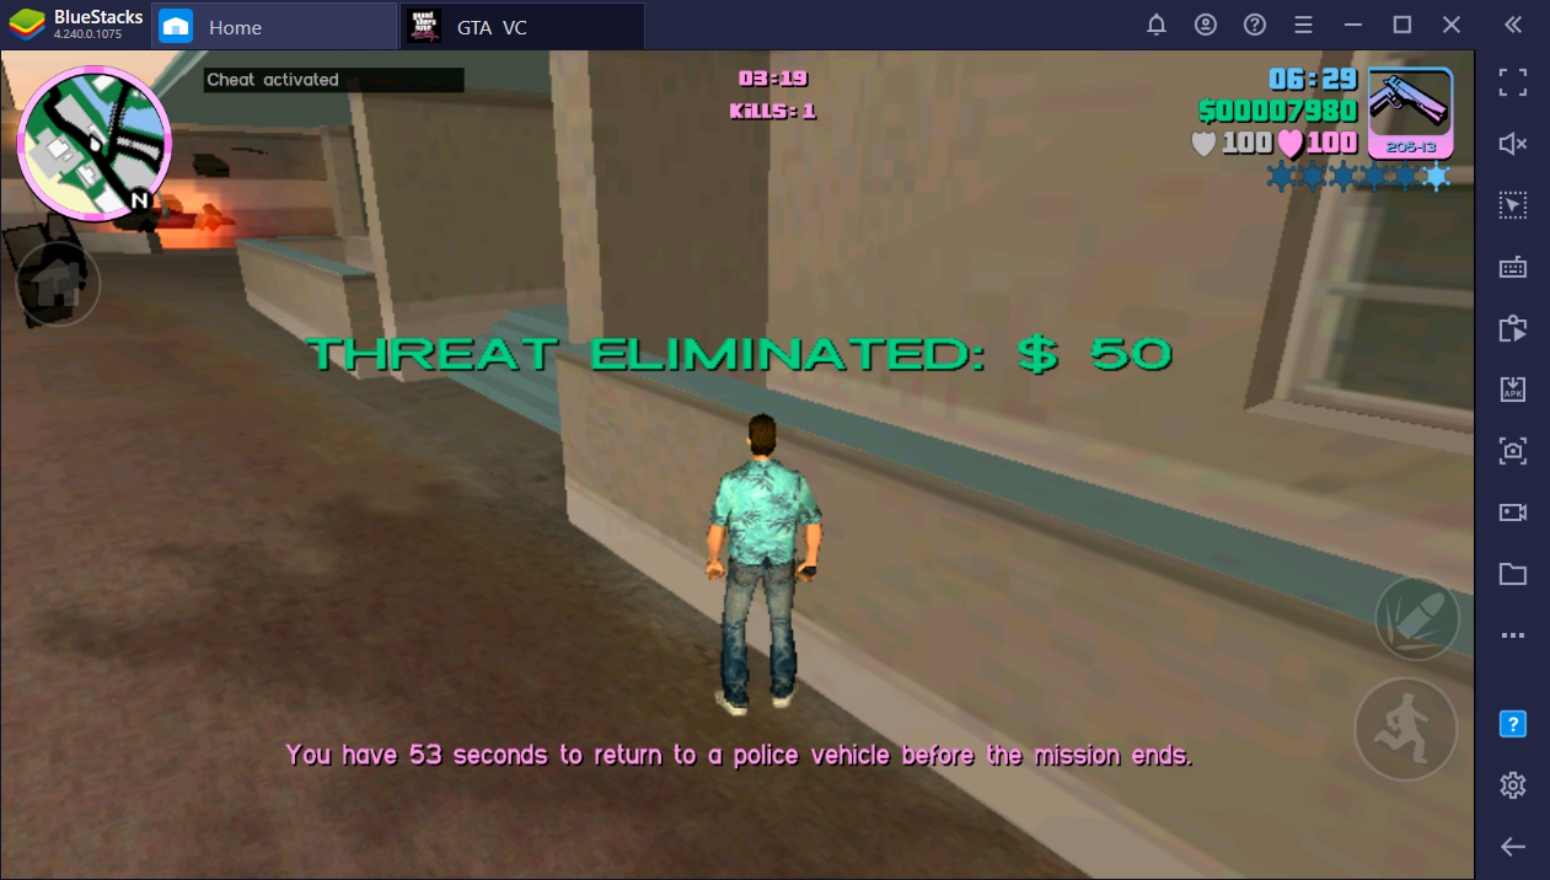 How to earn money in gta vice city cheat